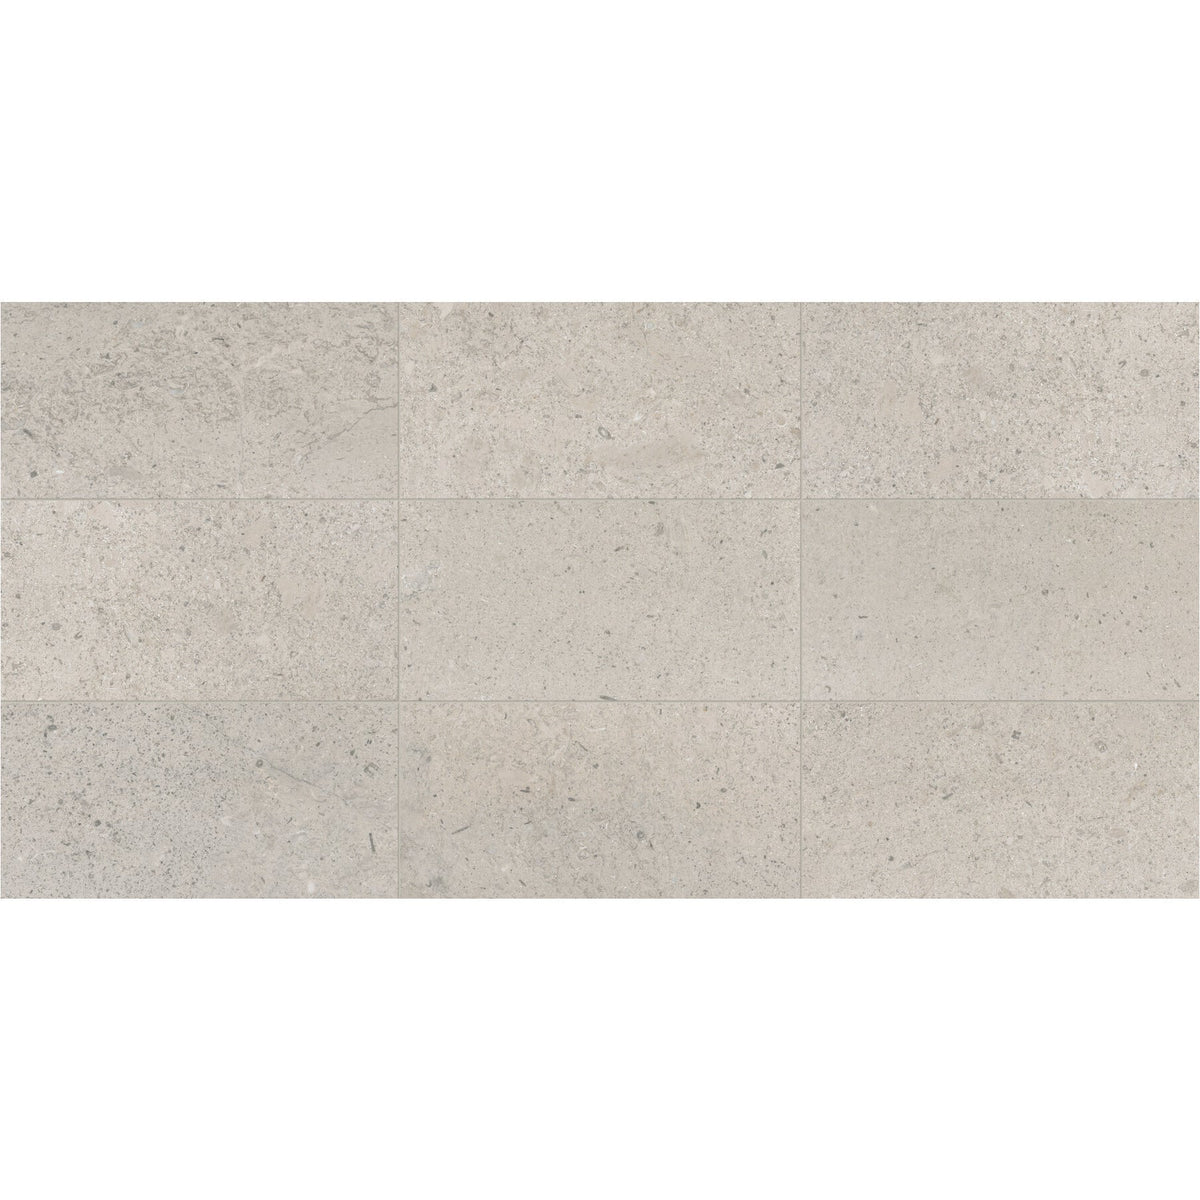 Daltile - Center City - 12 in. x 24 in. Natural Stone - Delancey Grey Honed